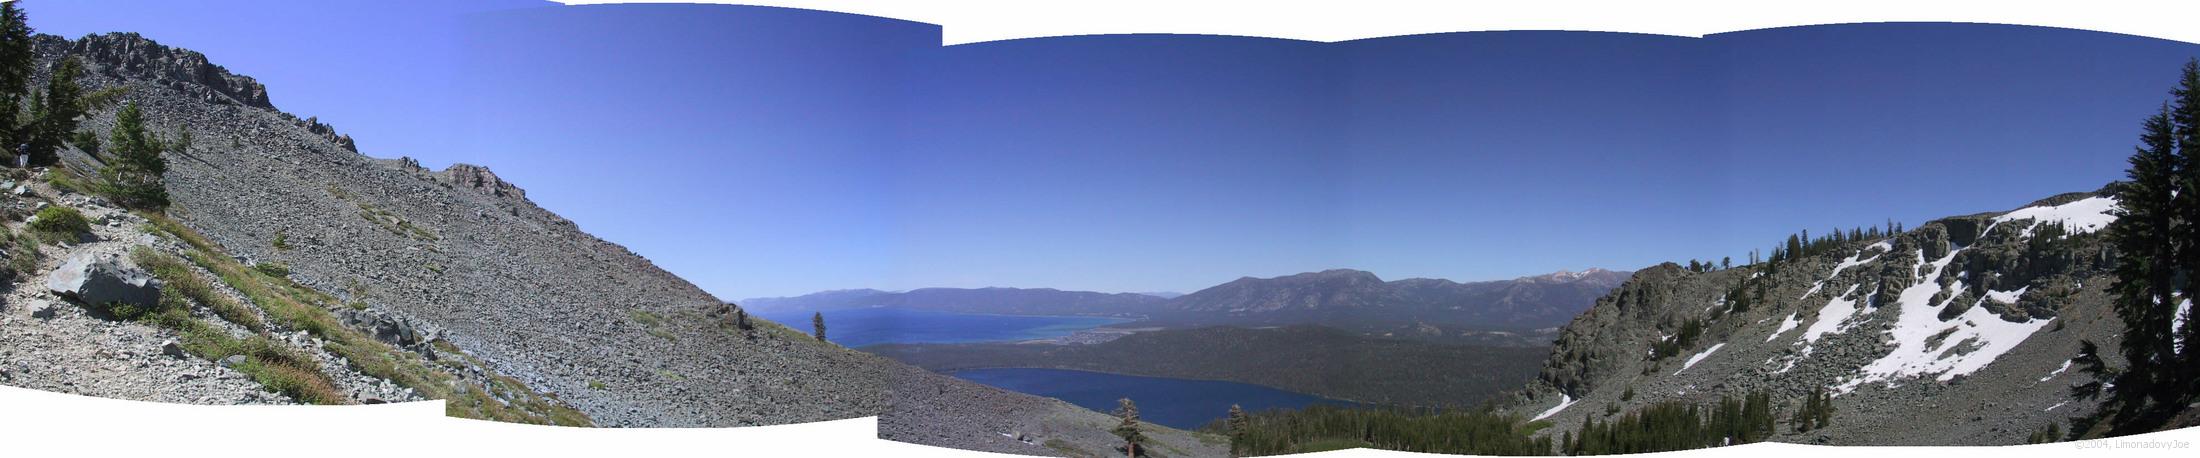 Mt.Tallac and Tahoe